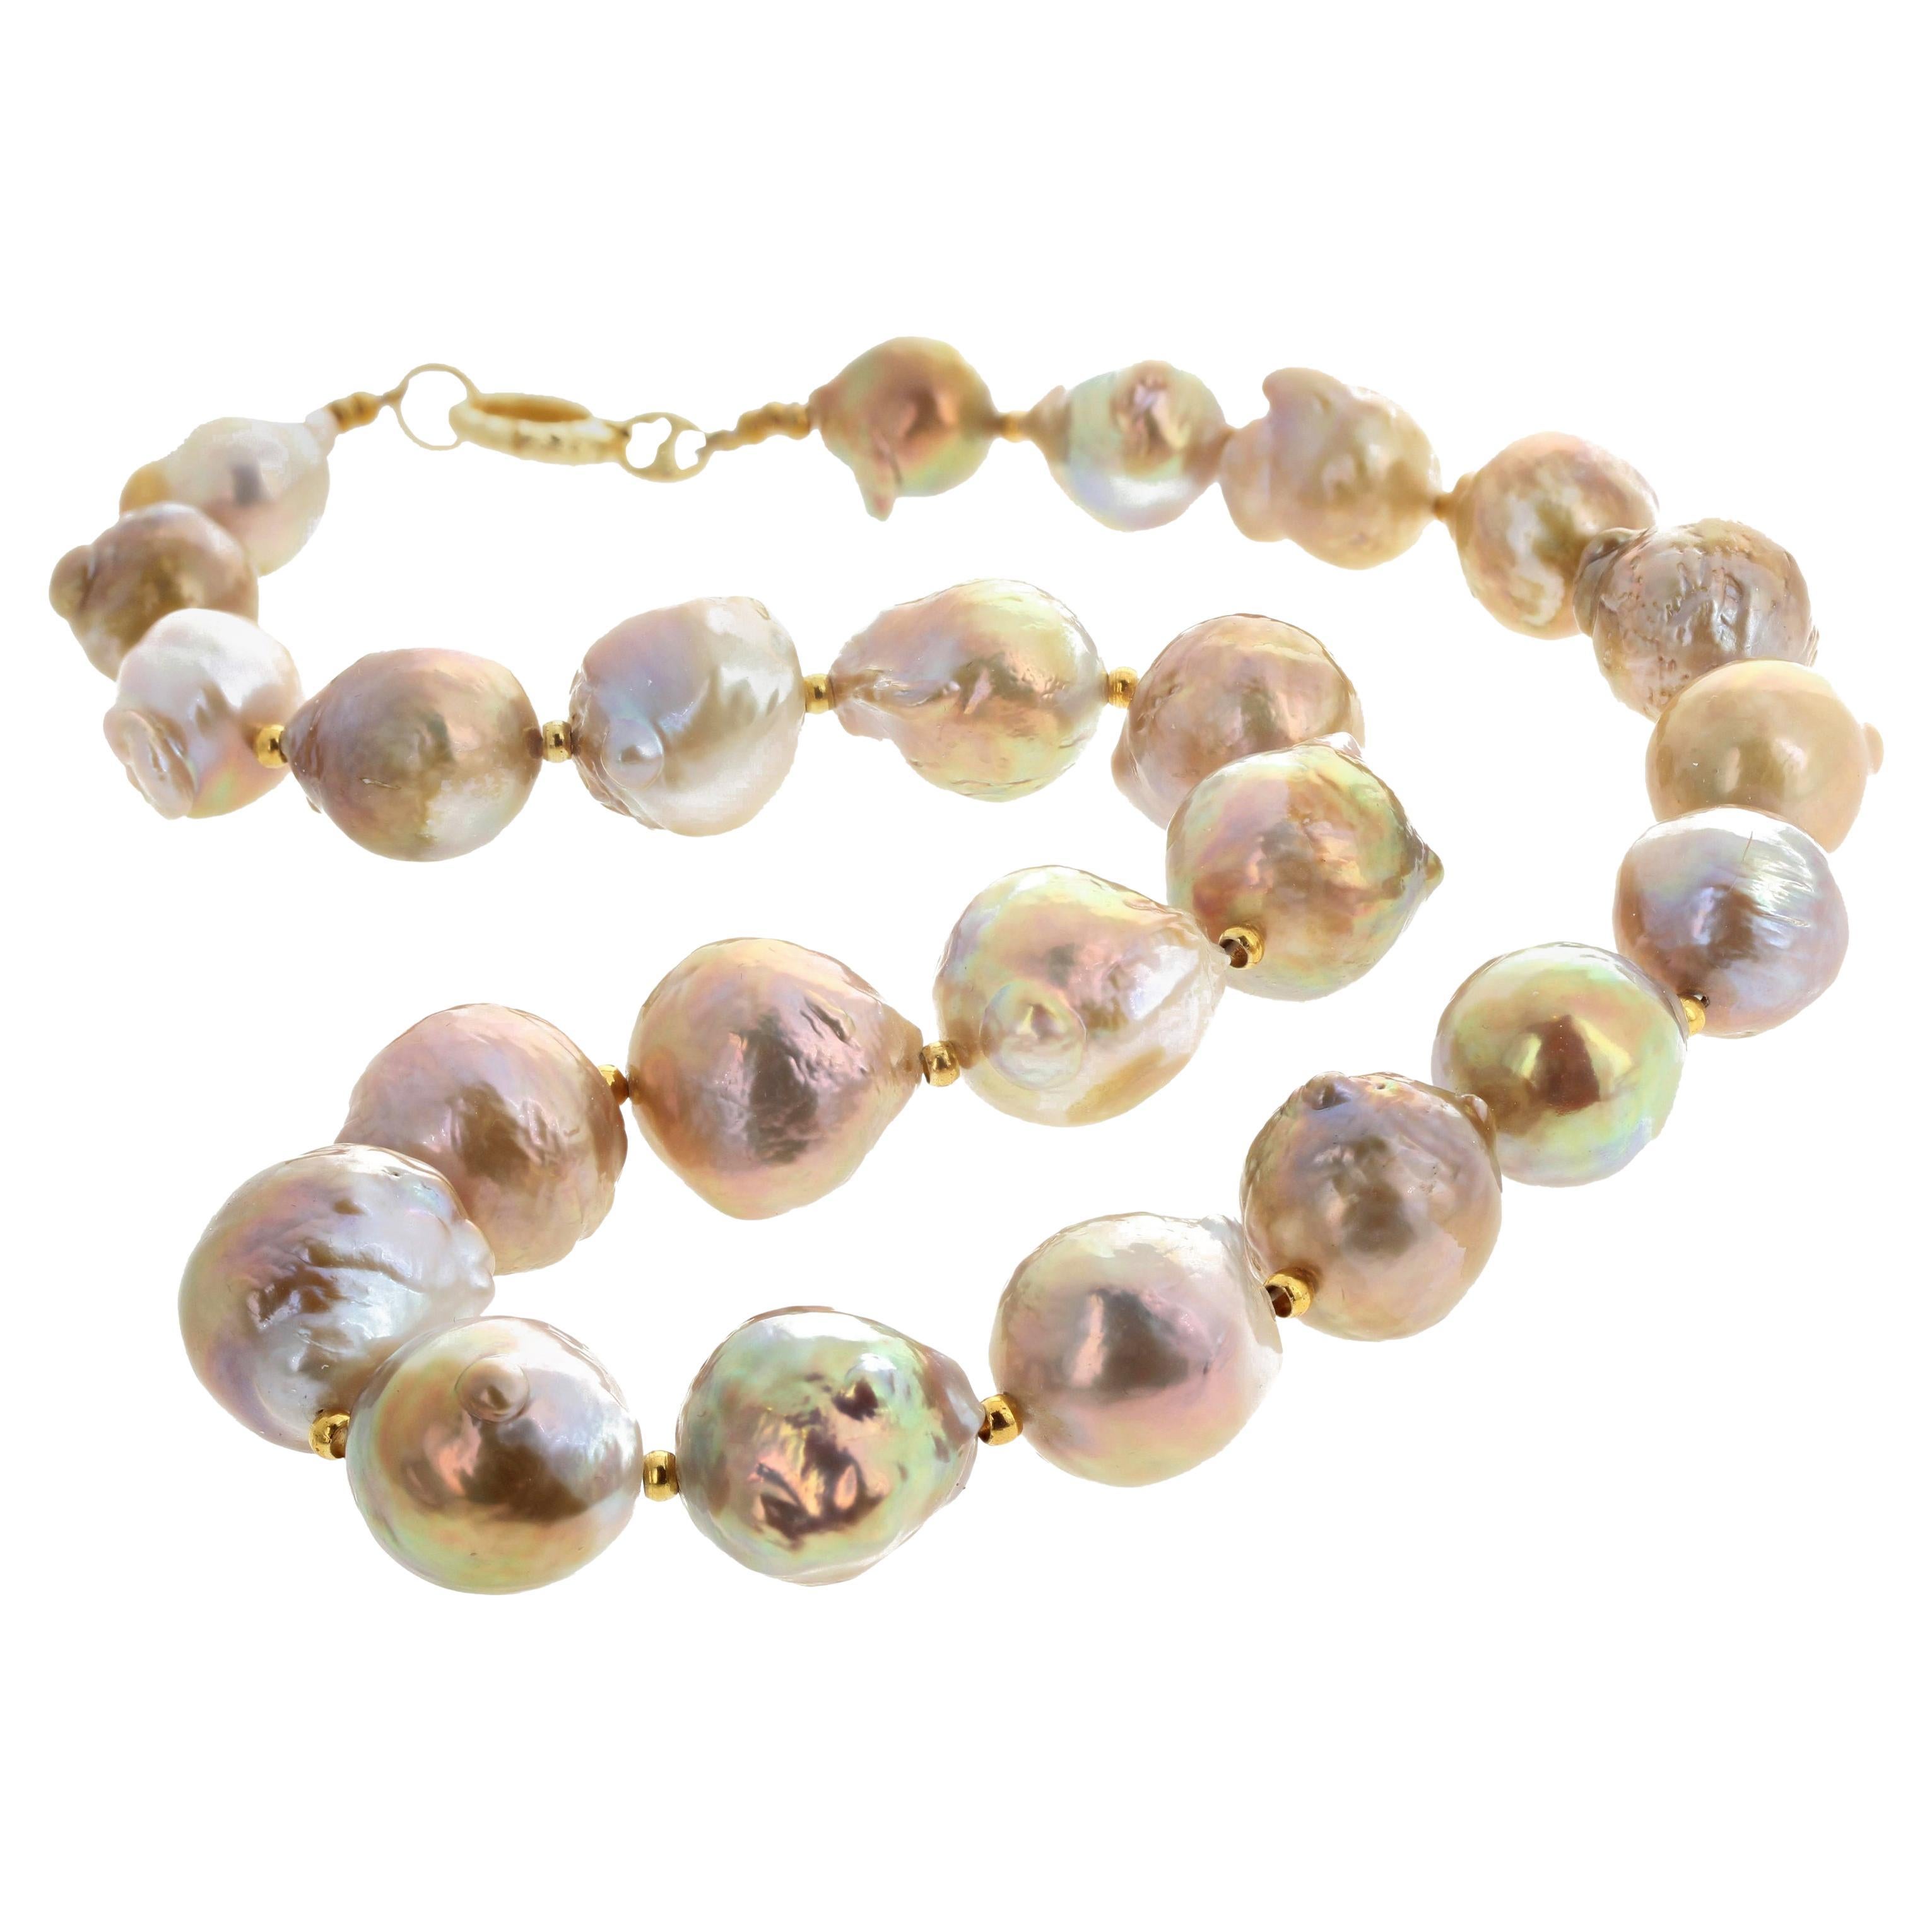 AJD Glowing 17" Long Large Real Natural Cultured 18mm Pearls Necklace